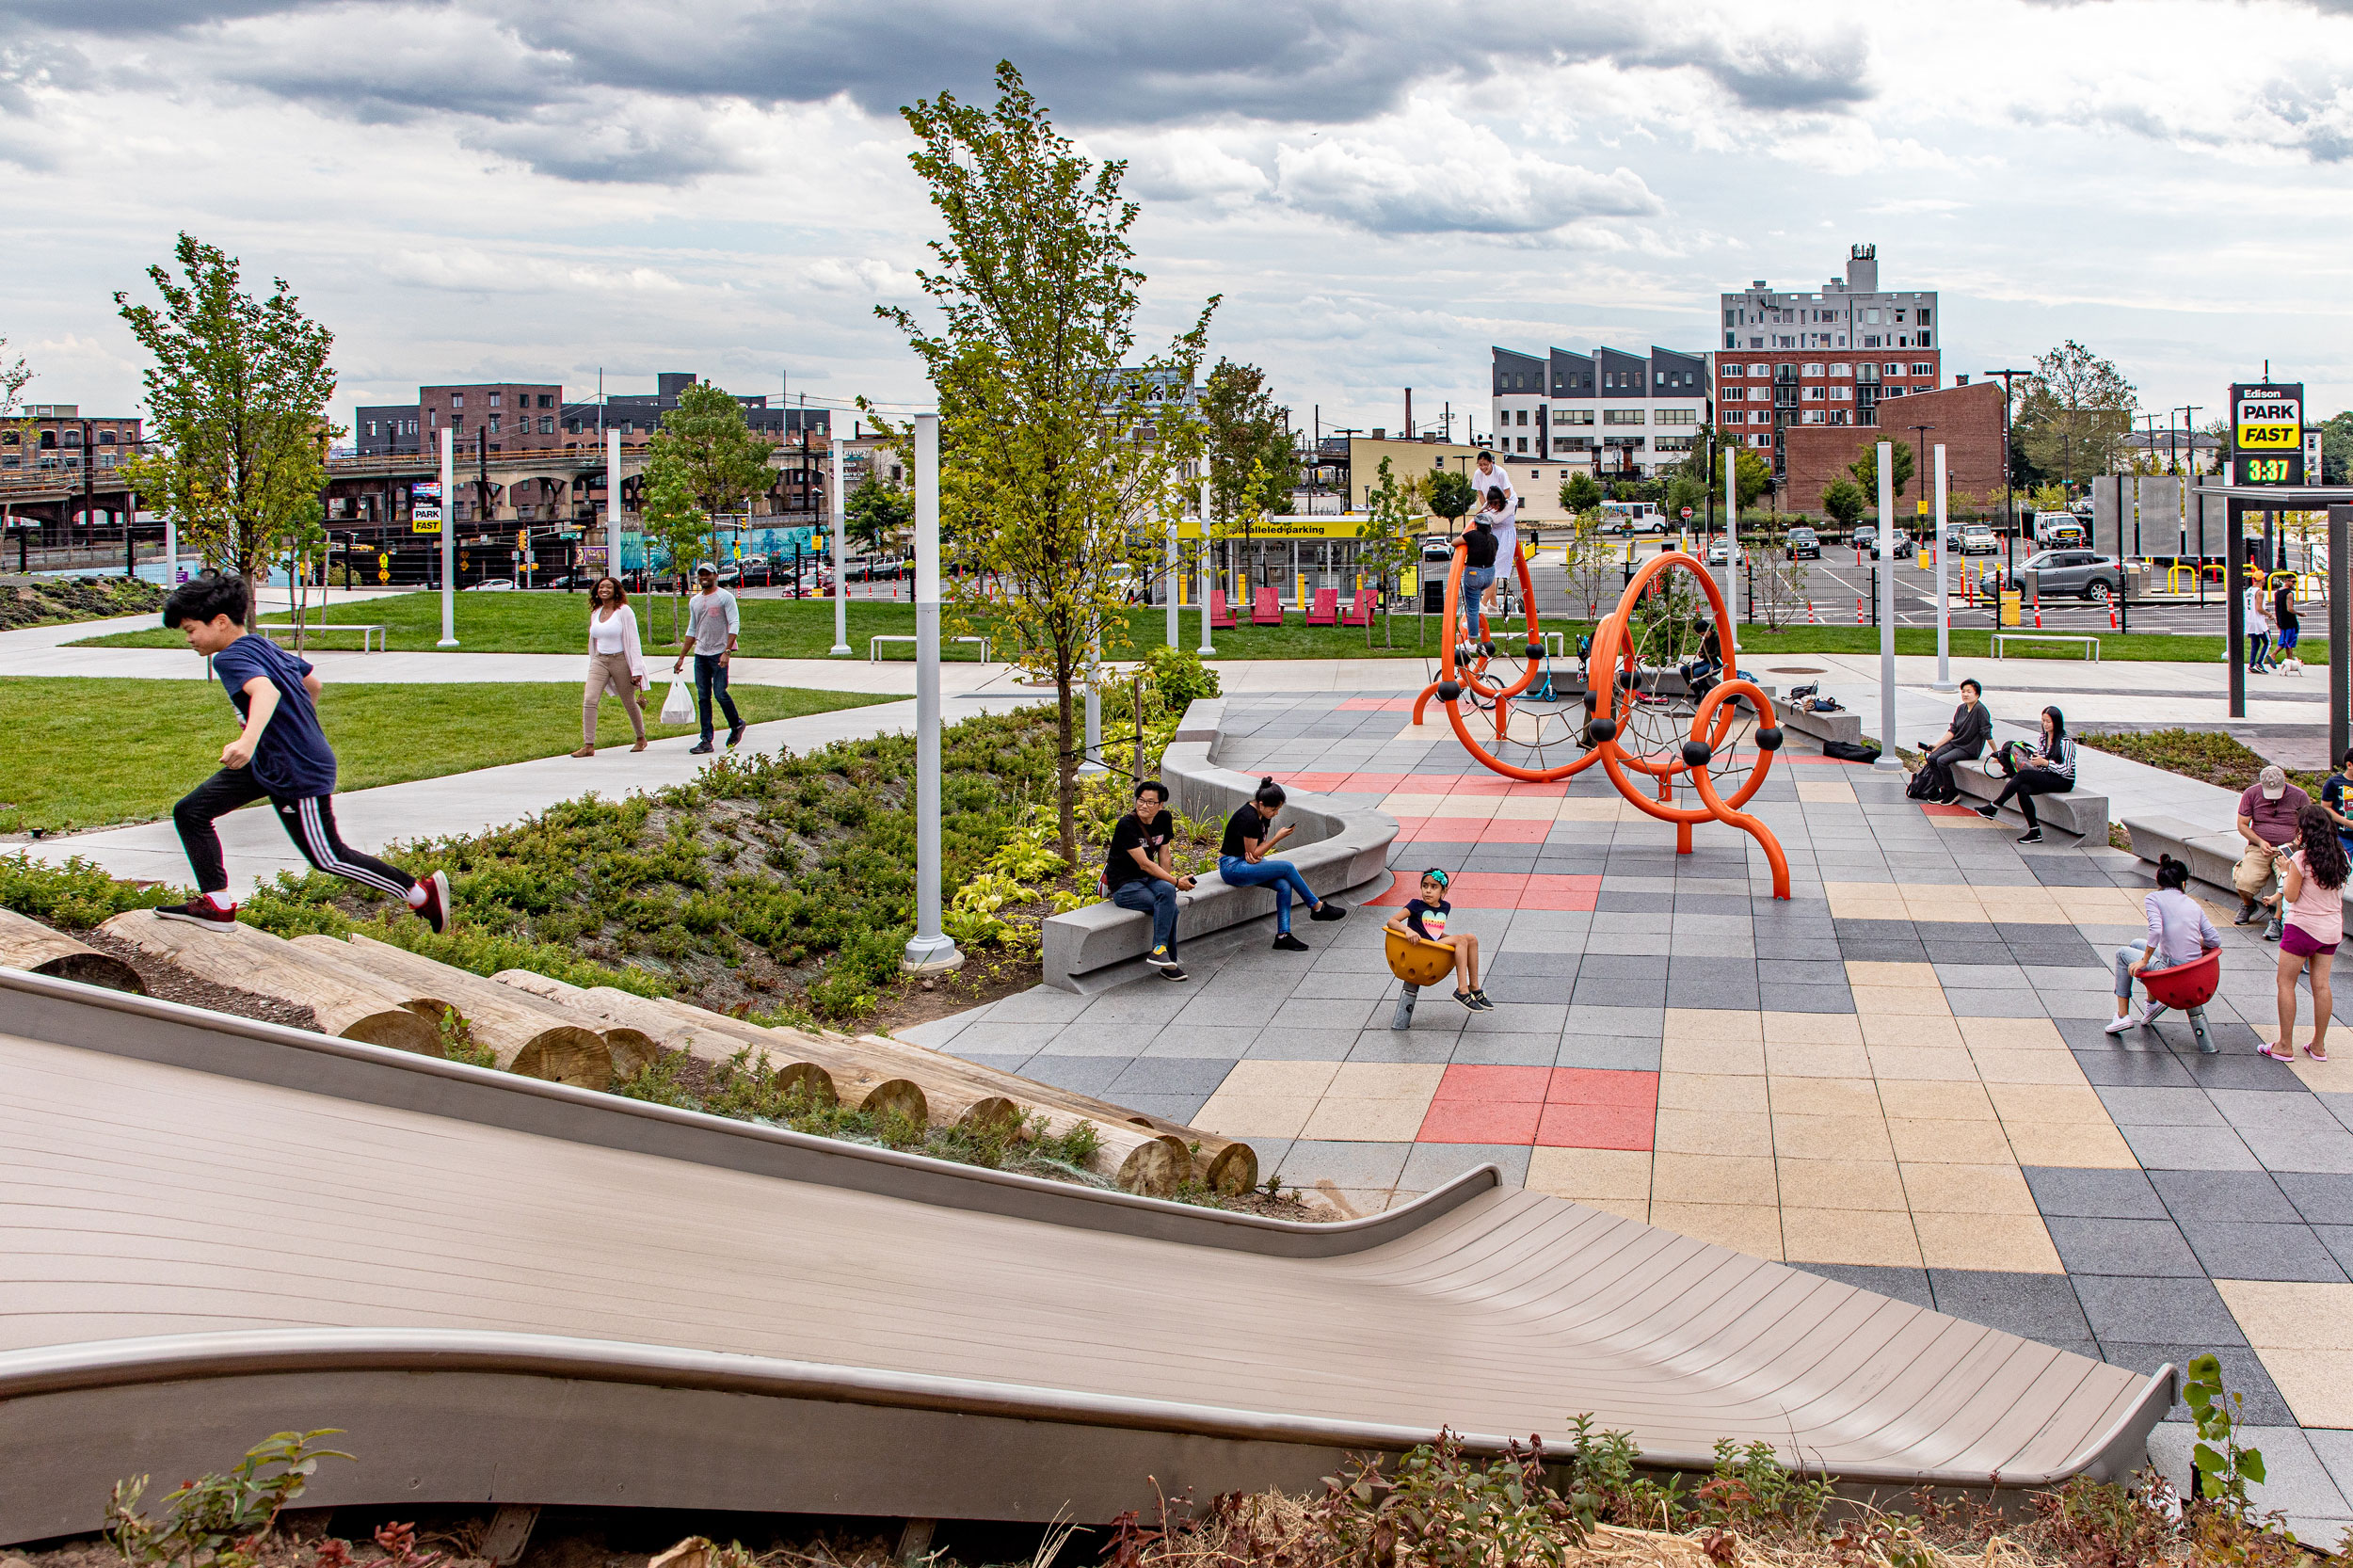 Mulberry Commons Park by Sage and Coombe Architects (Architect) and Supermass Studio (Landscape Architect). Photo: Barrett Doherty Images.